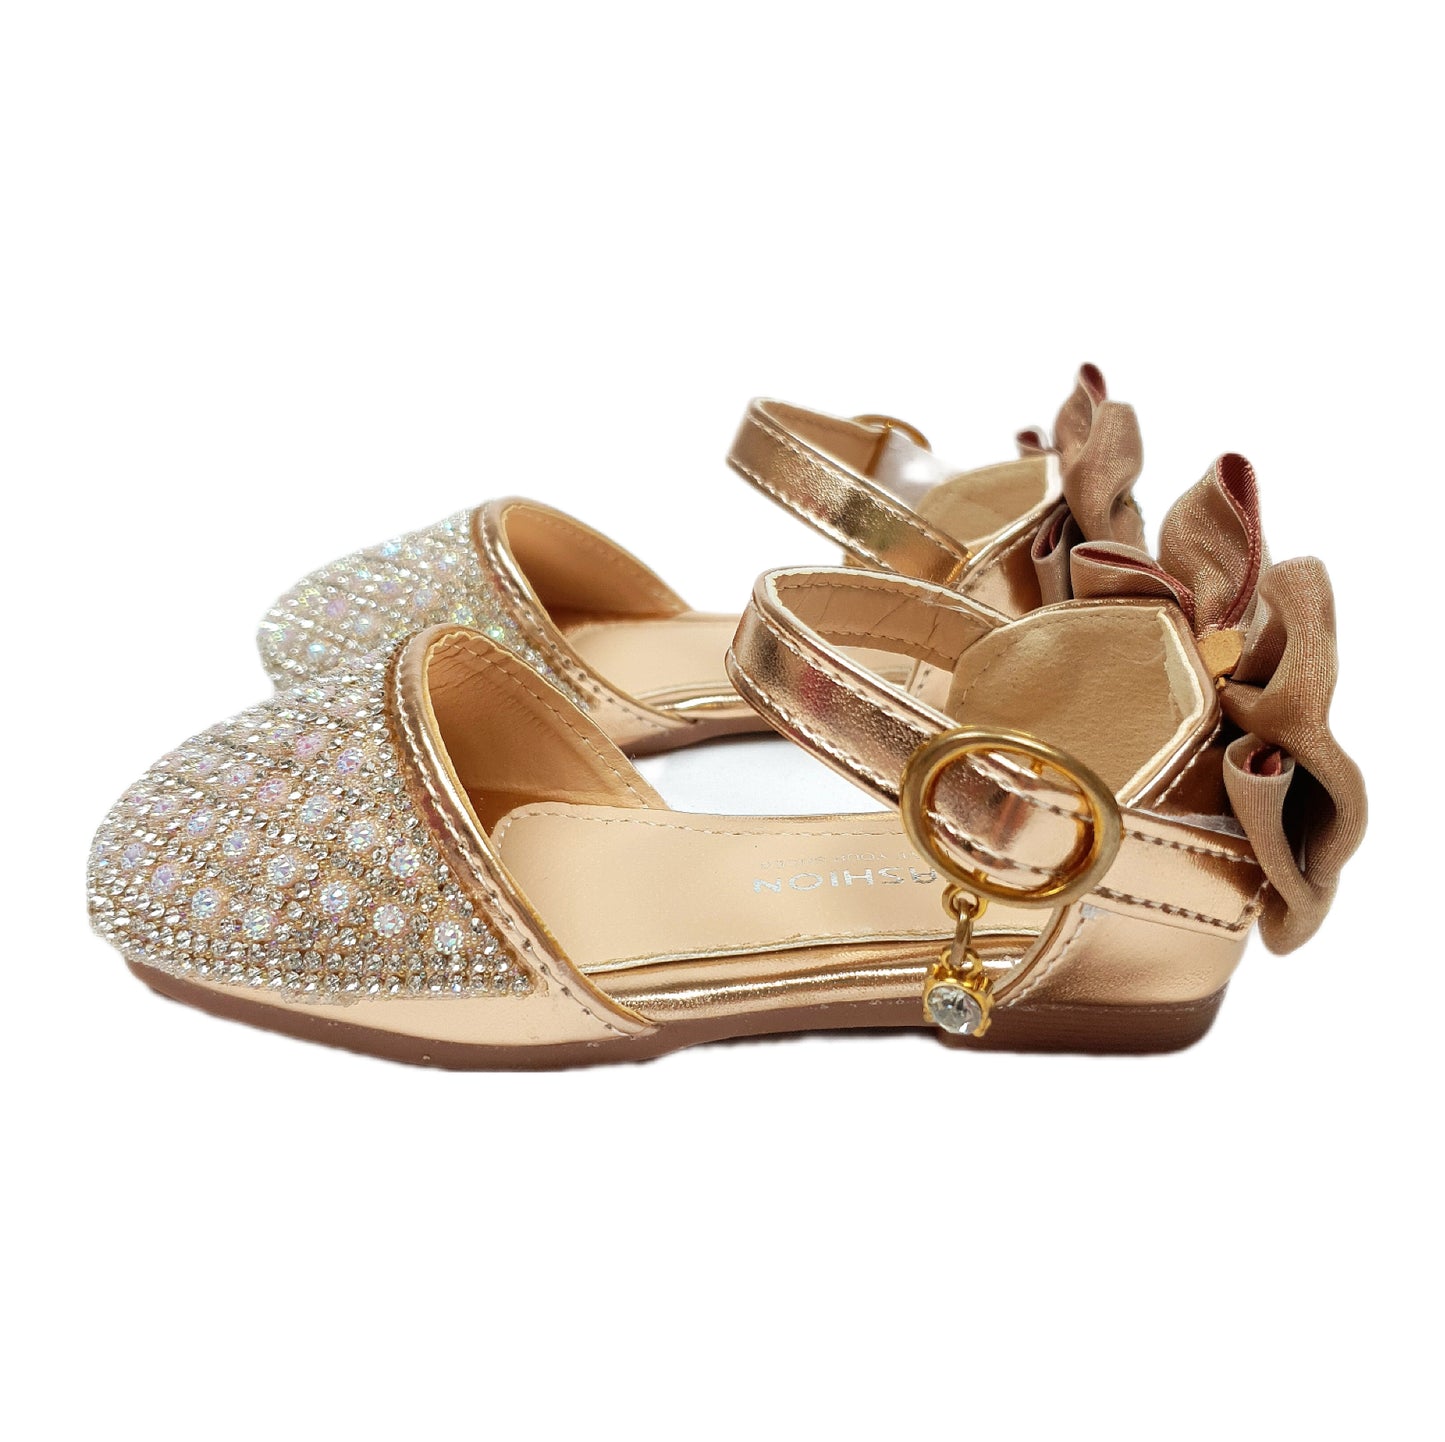 Sparkly rhinestone covered gold shoes